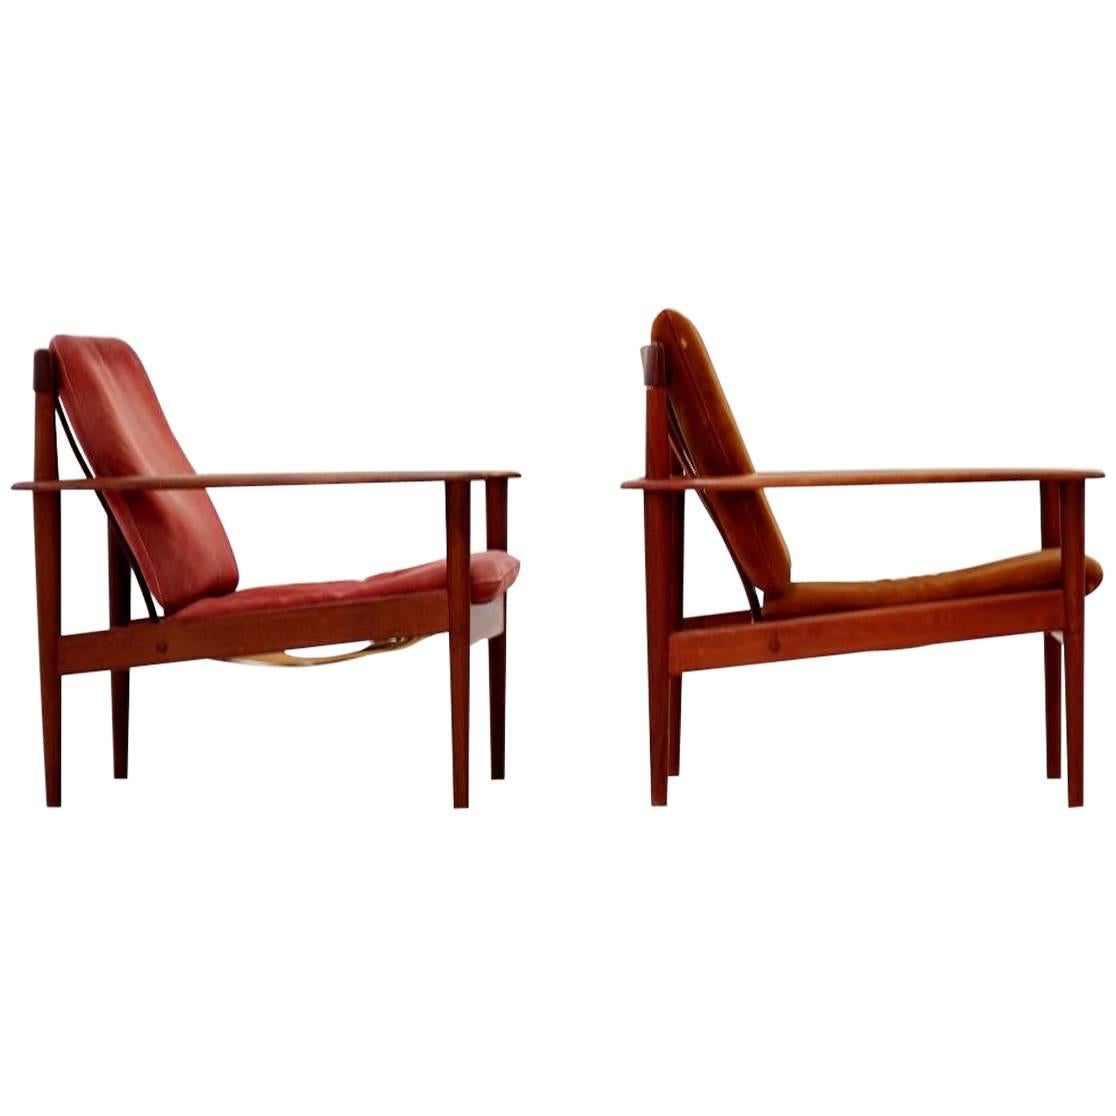 Set of Two Chairs by Grete Jalk for Poul Jeppesen Danish Leather Lounge Armchair